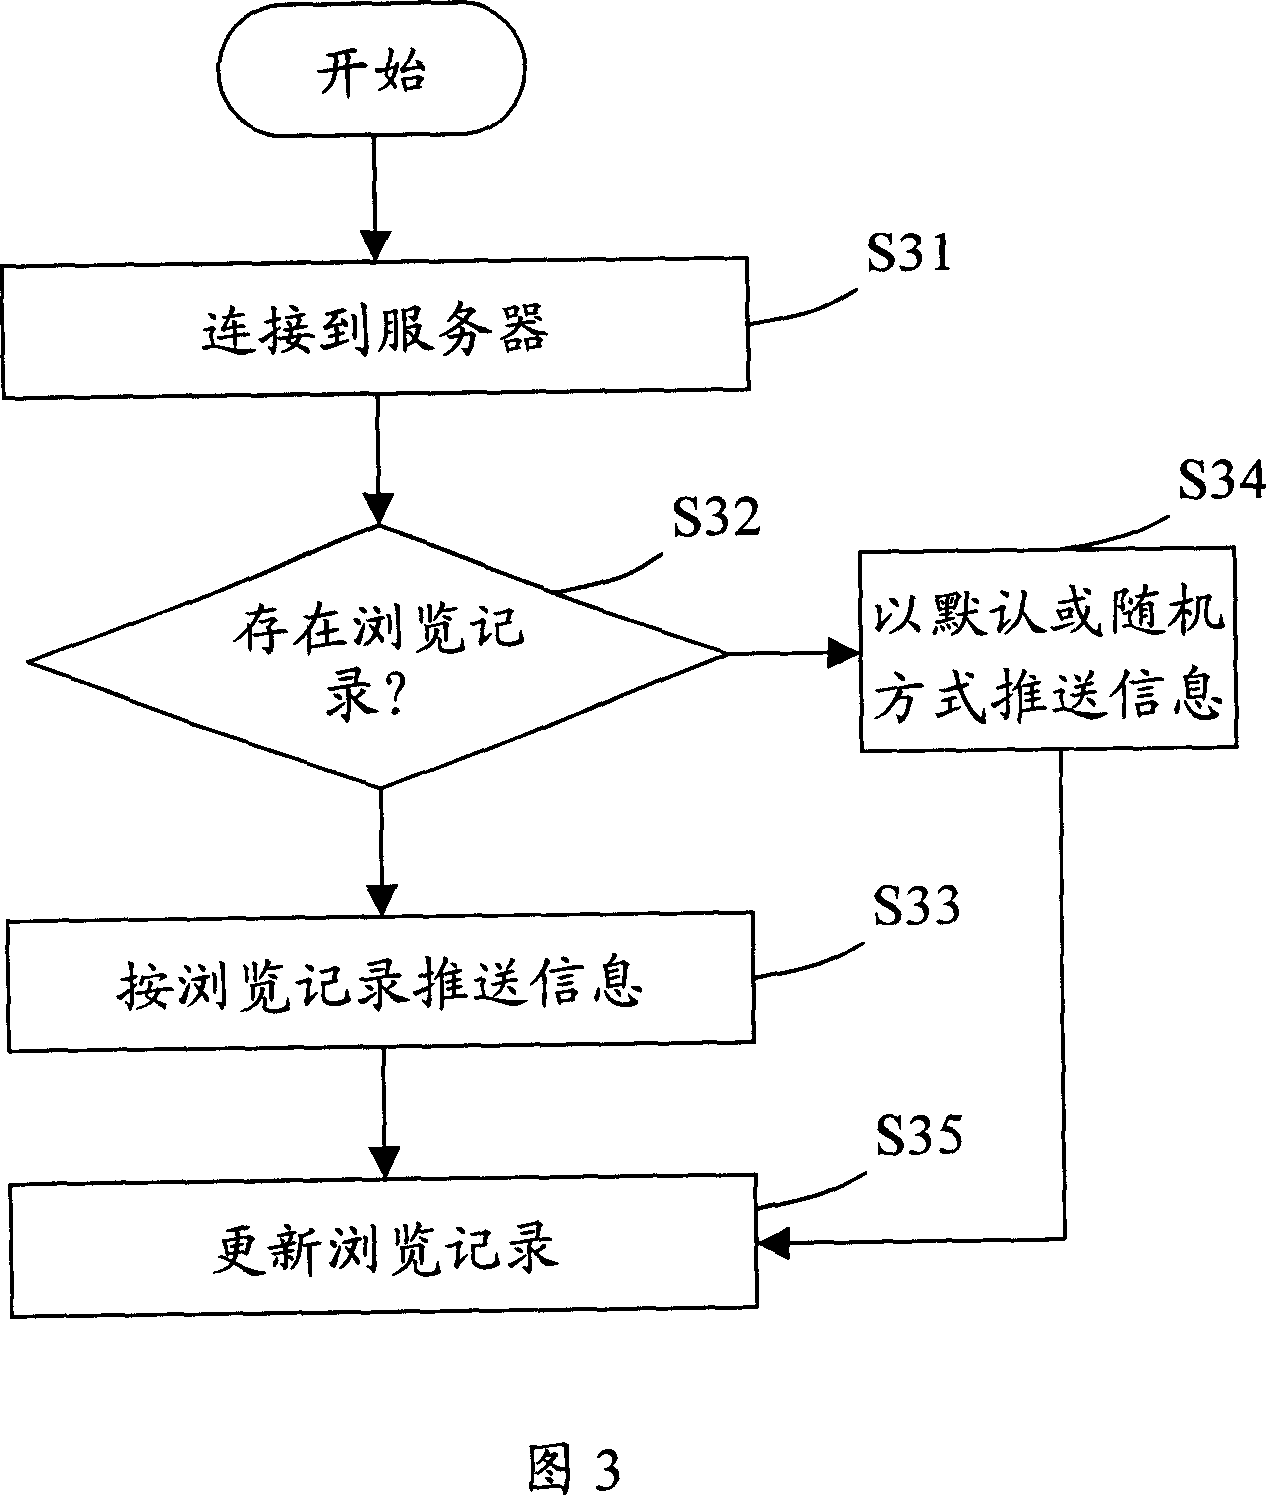 Class information transmitting system and method